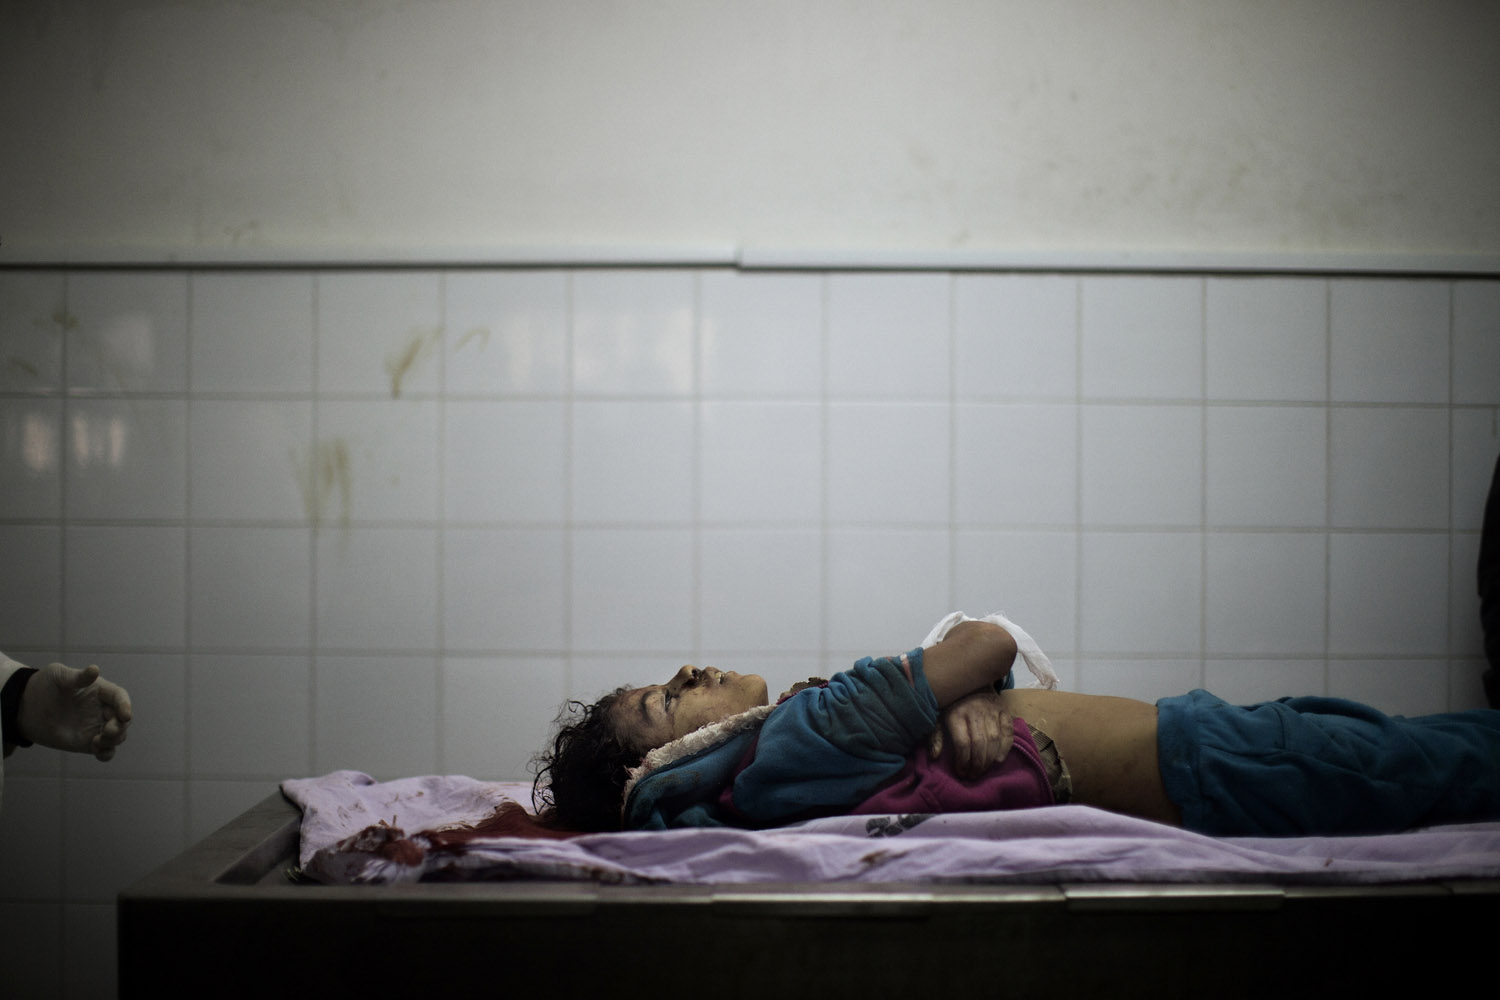 Nov. 20, 2012. The body of Tasneem al-Nahal, 13, lies in the morgue of the al-Shifa hospital in Gaza City after she was killed by an Israeli airstrike in Shati refugee camp two days previous.